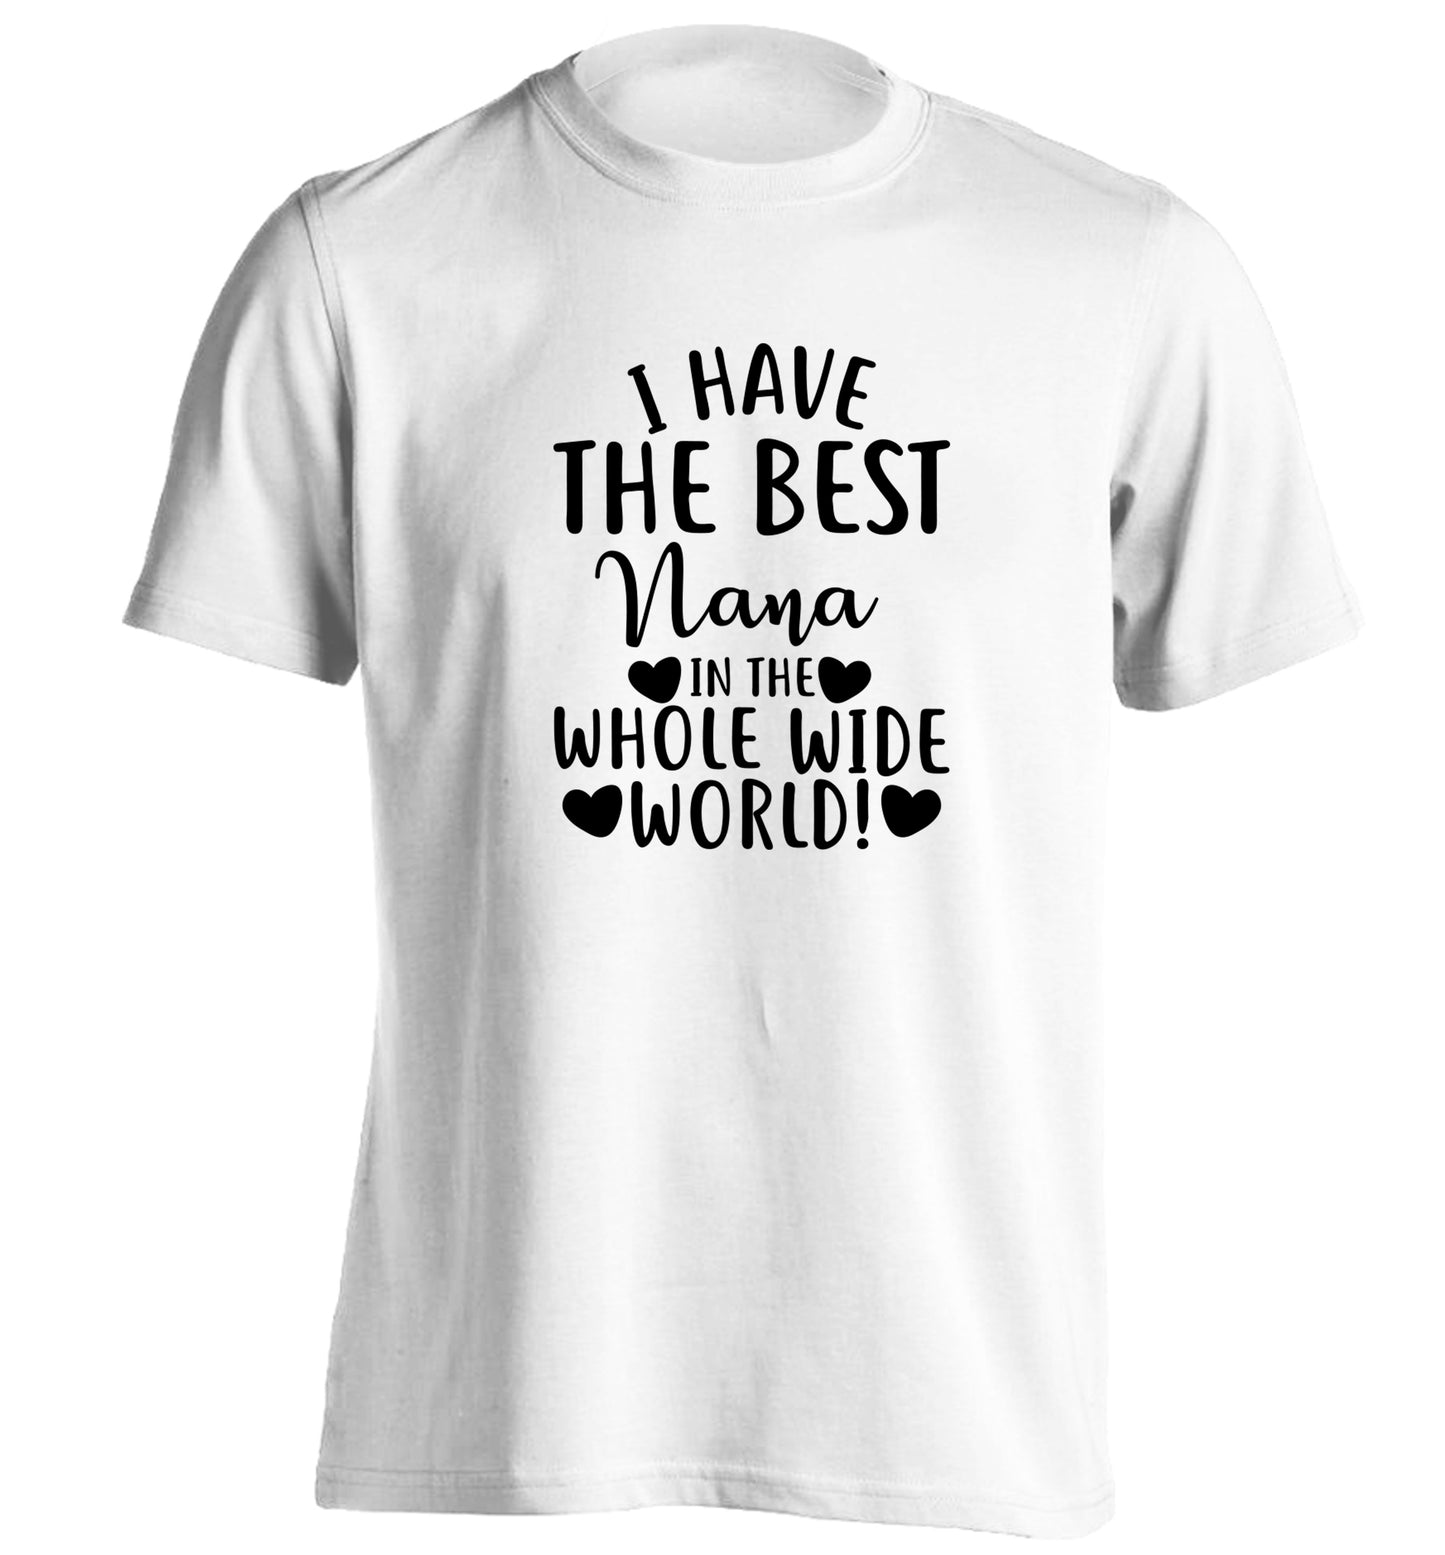 I have the best nana in the whole wide world! adults unisex white Tshirt 2XL